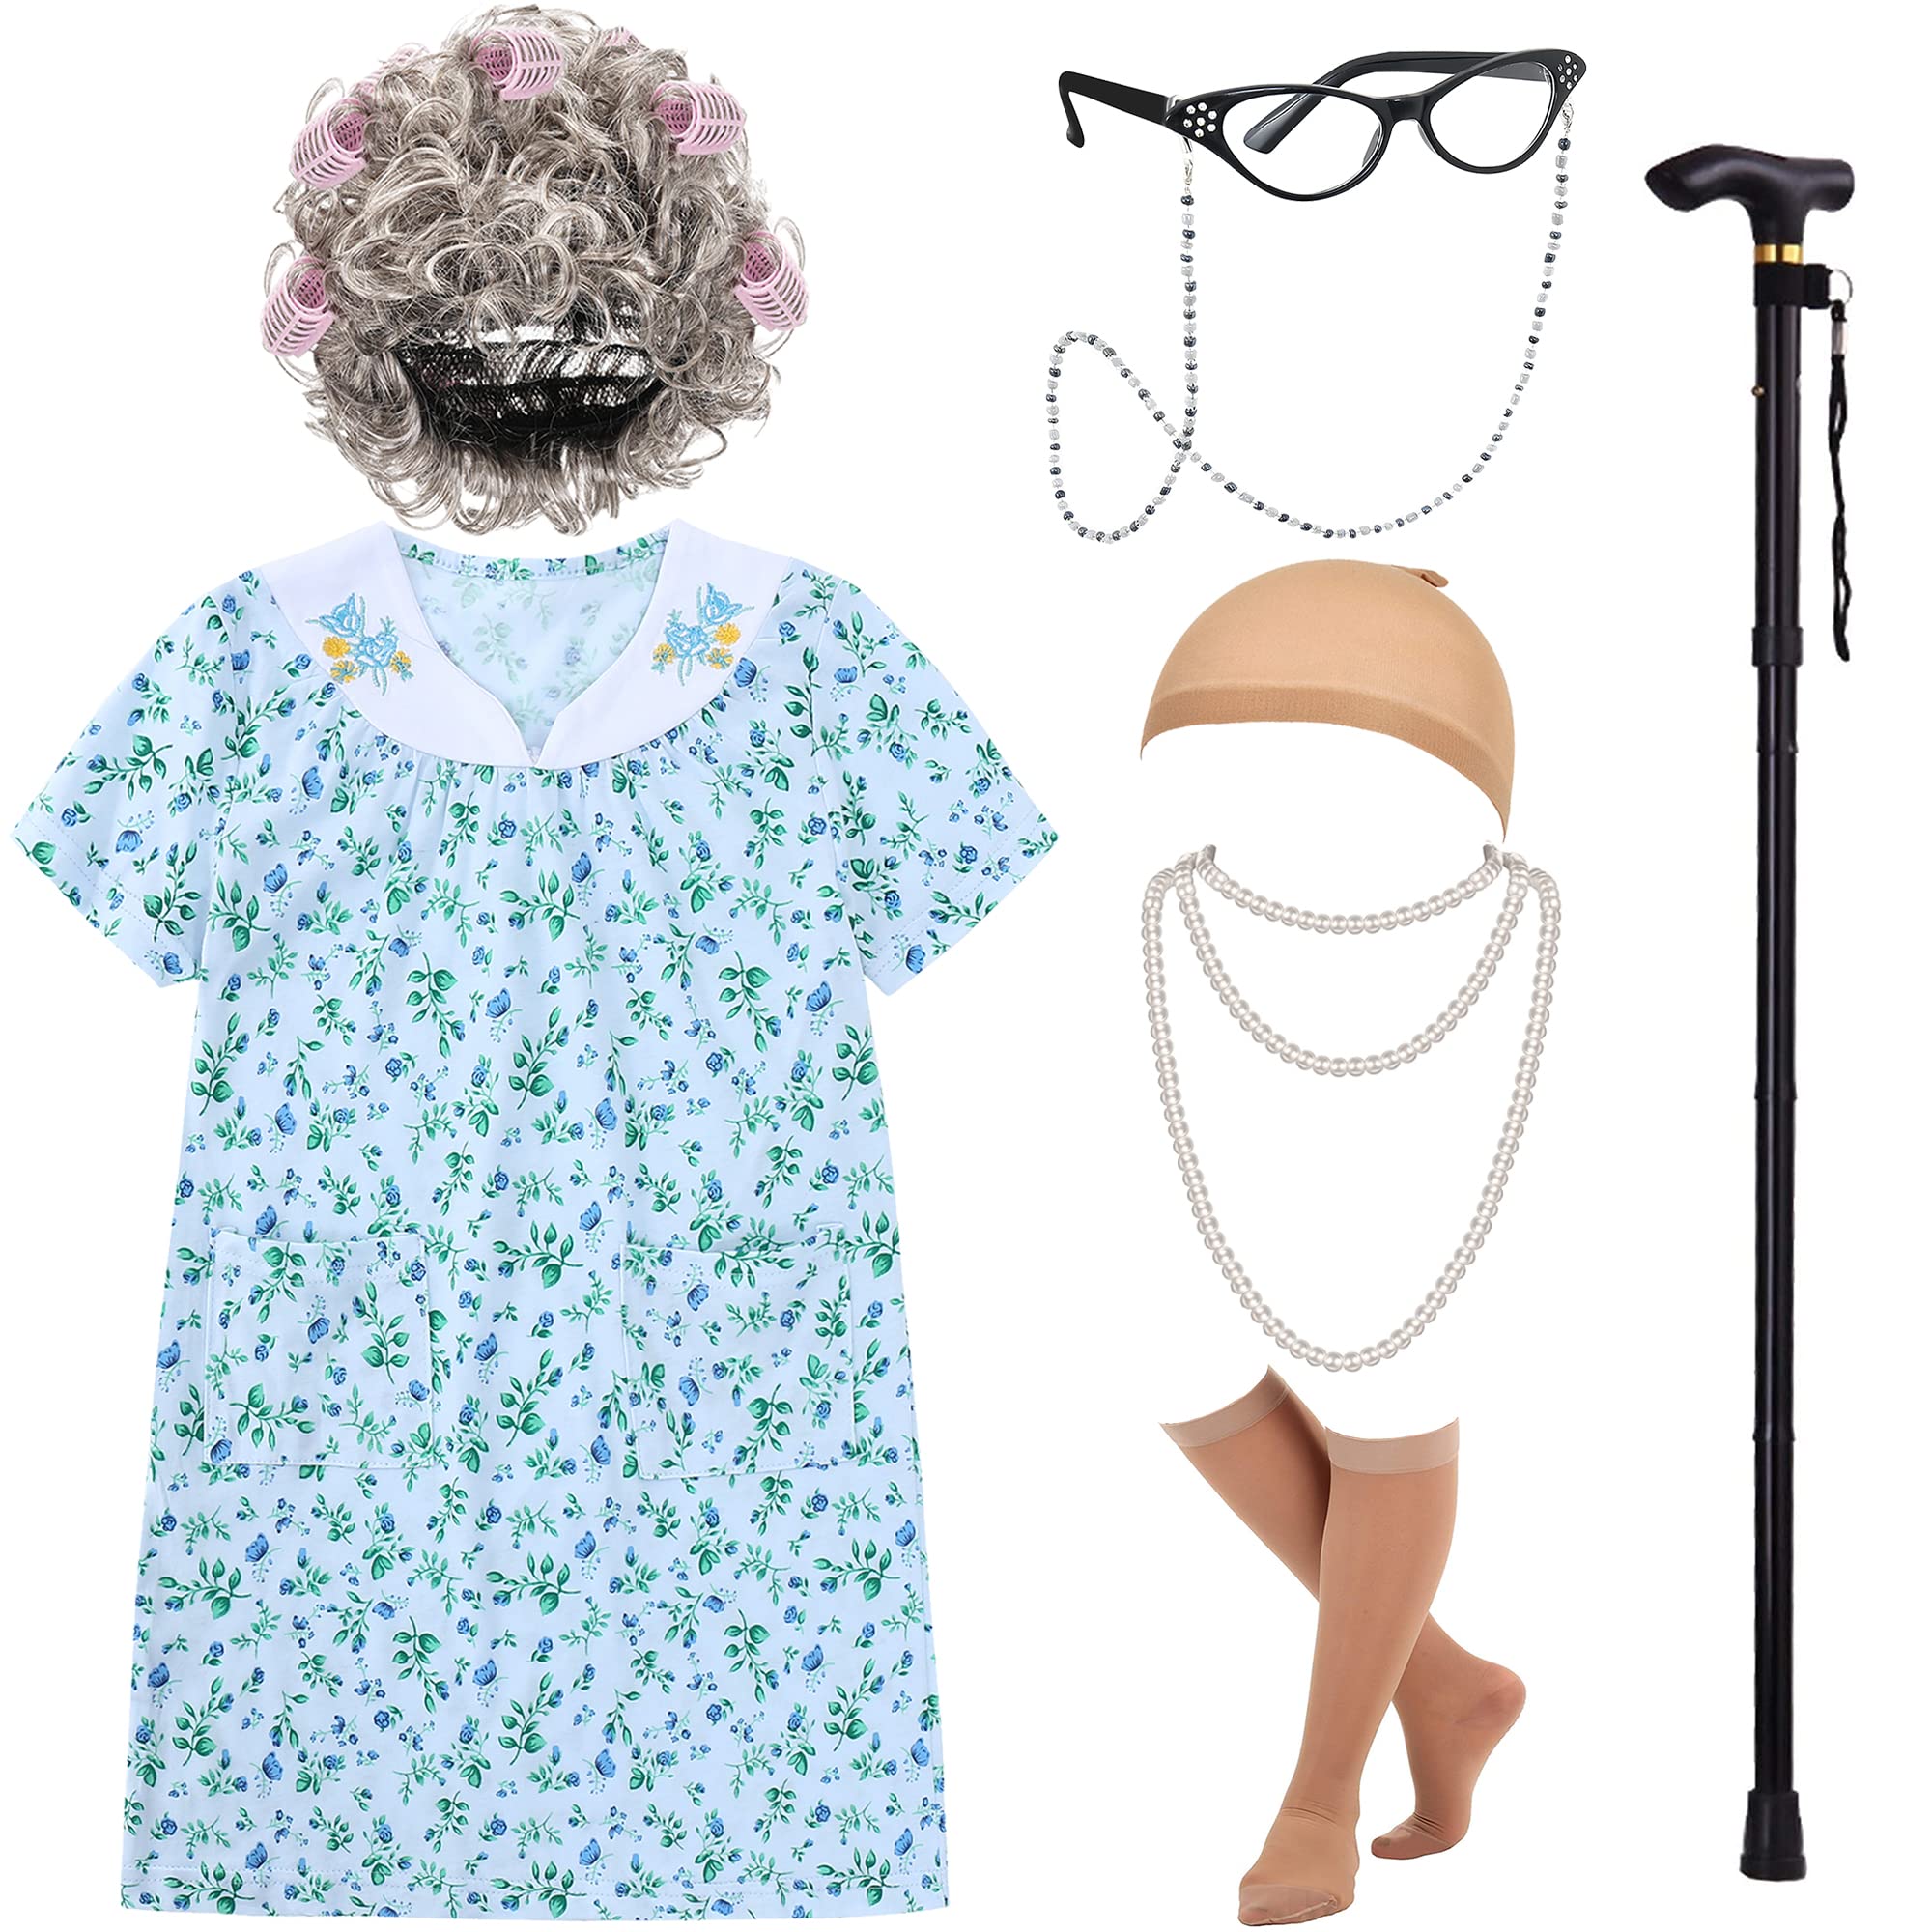 EBYTOP Girls Old Lady Costume Kit with Nightgown Wig Cane & Other Halloween Cosplay Accessories